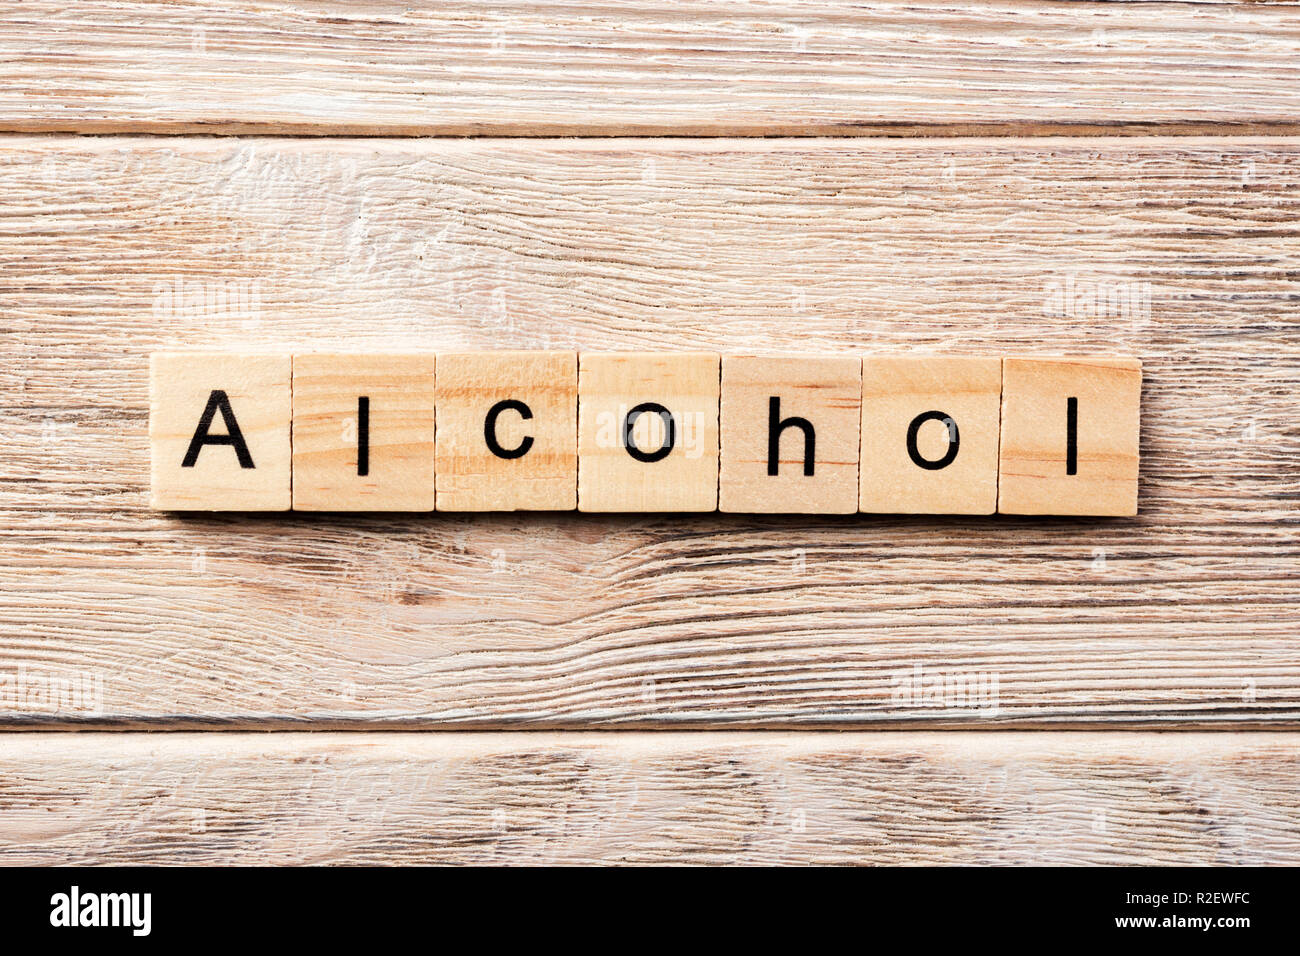 alcohol word written on wood block. alcohol text on table, concept. Stock Photo